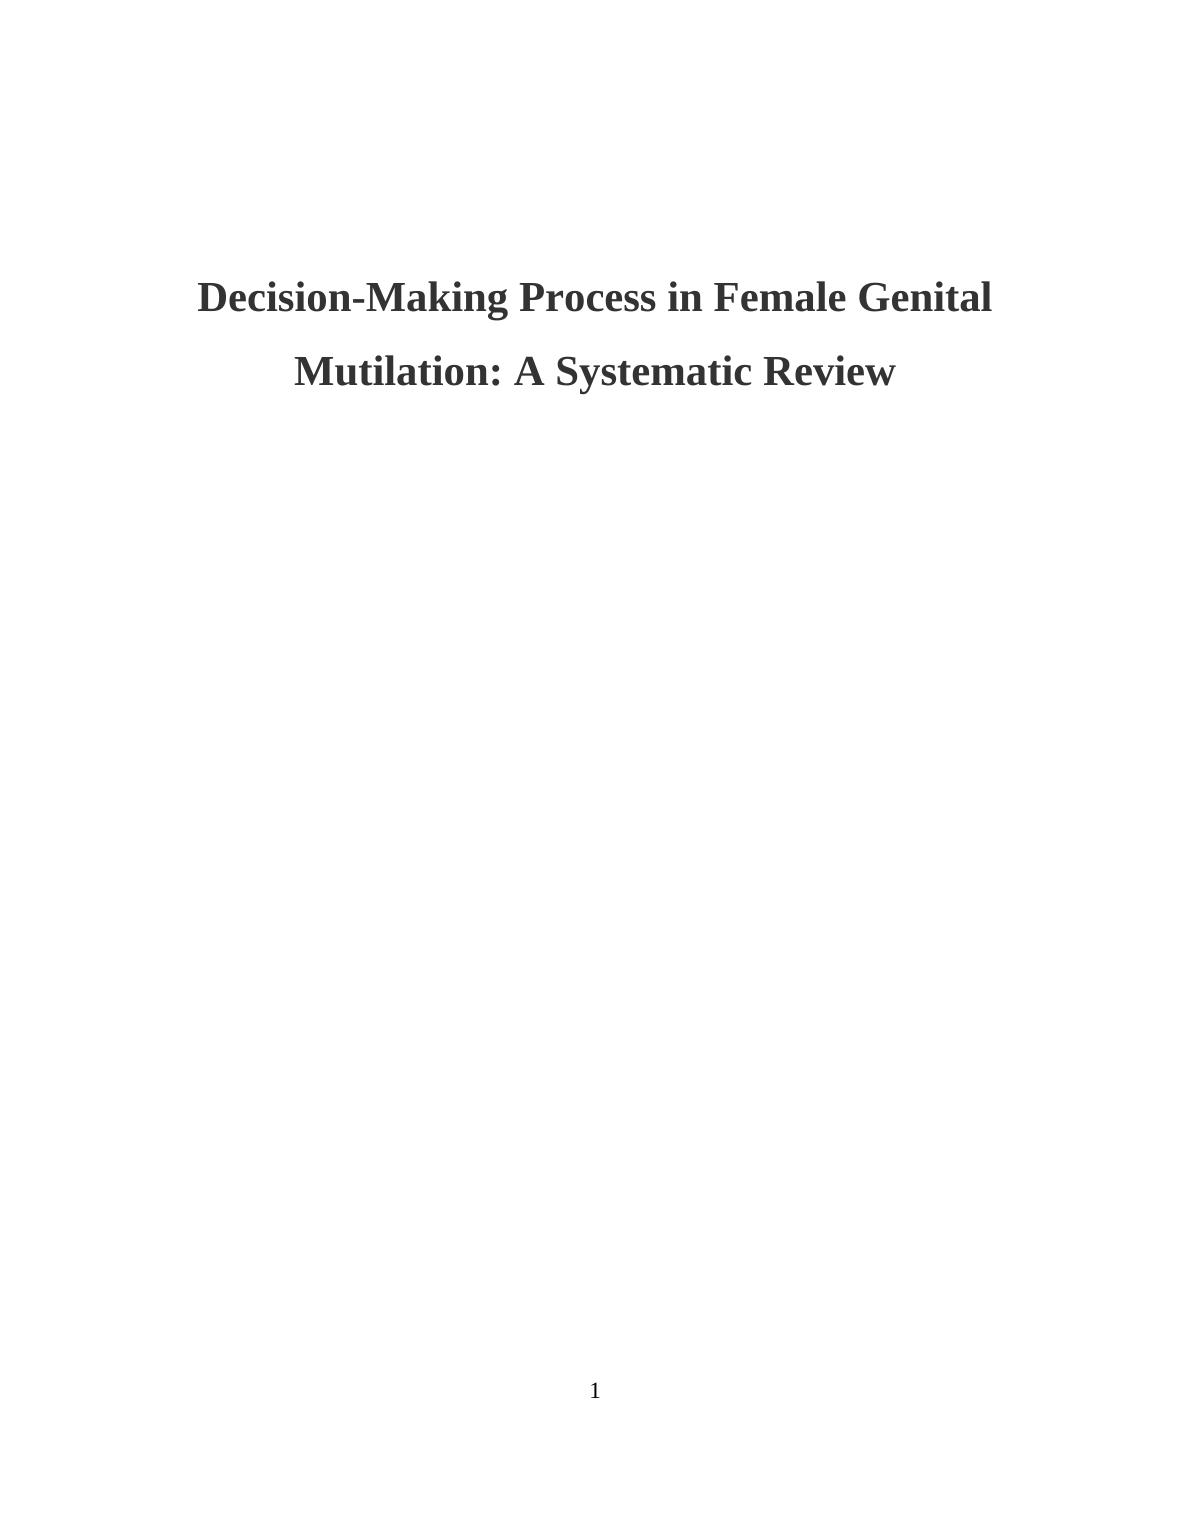 Decision-Making Process in Female Genital Mutilation: A Systematic Review_1